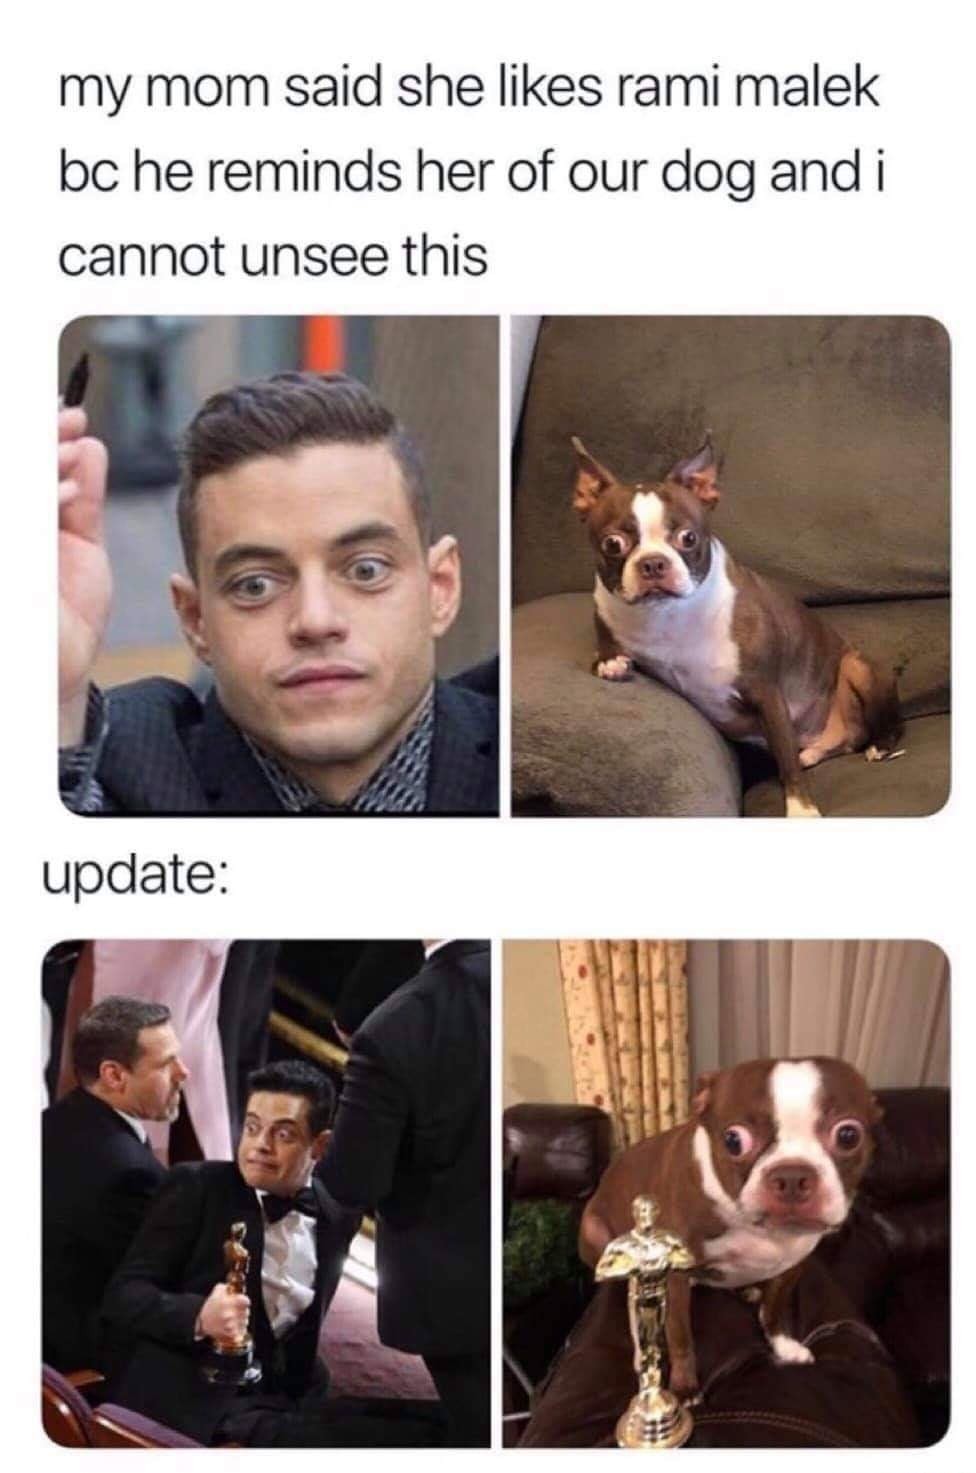 rami malek dog meme - my mom said she rami malek bc he reminds her of our dog and i cannot unsee this update